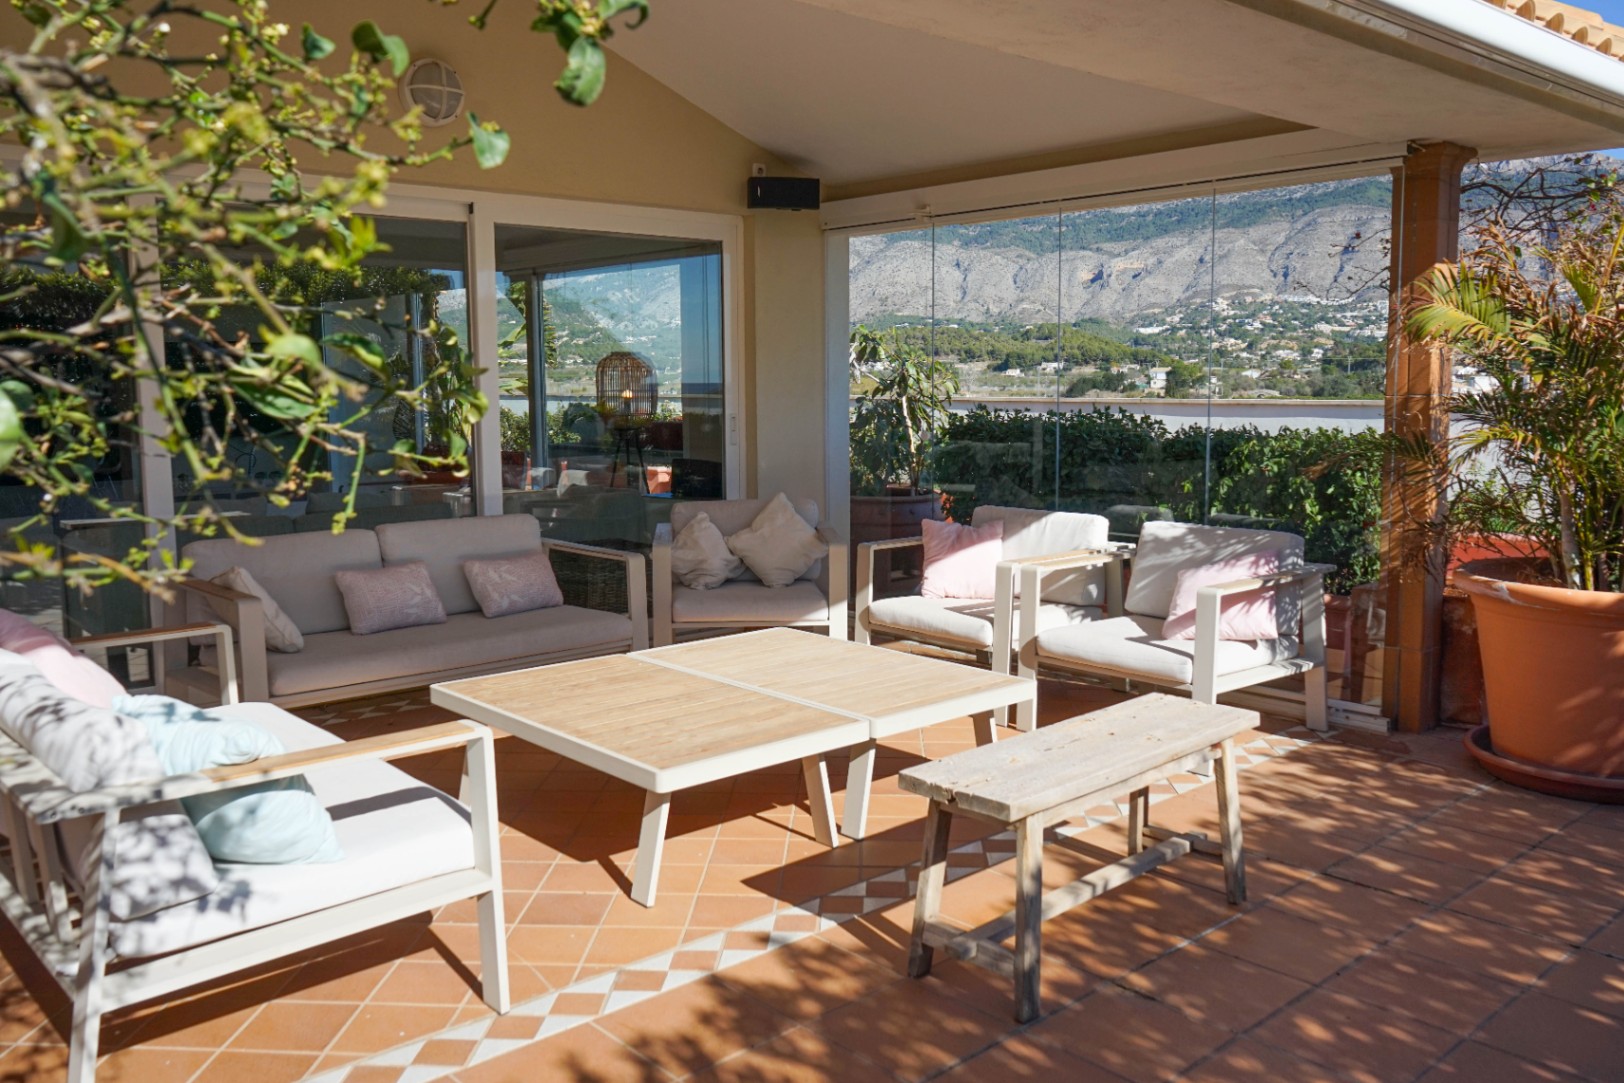 Apartment in Altea: Panoramic Sea Views and Wide Spaces